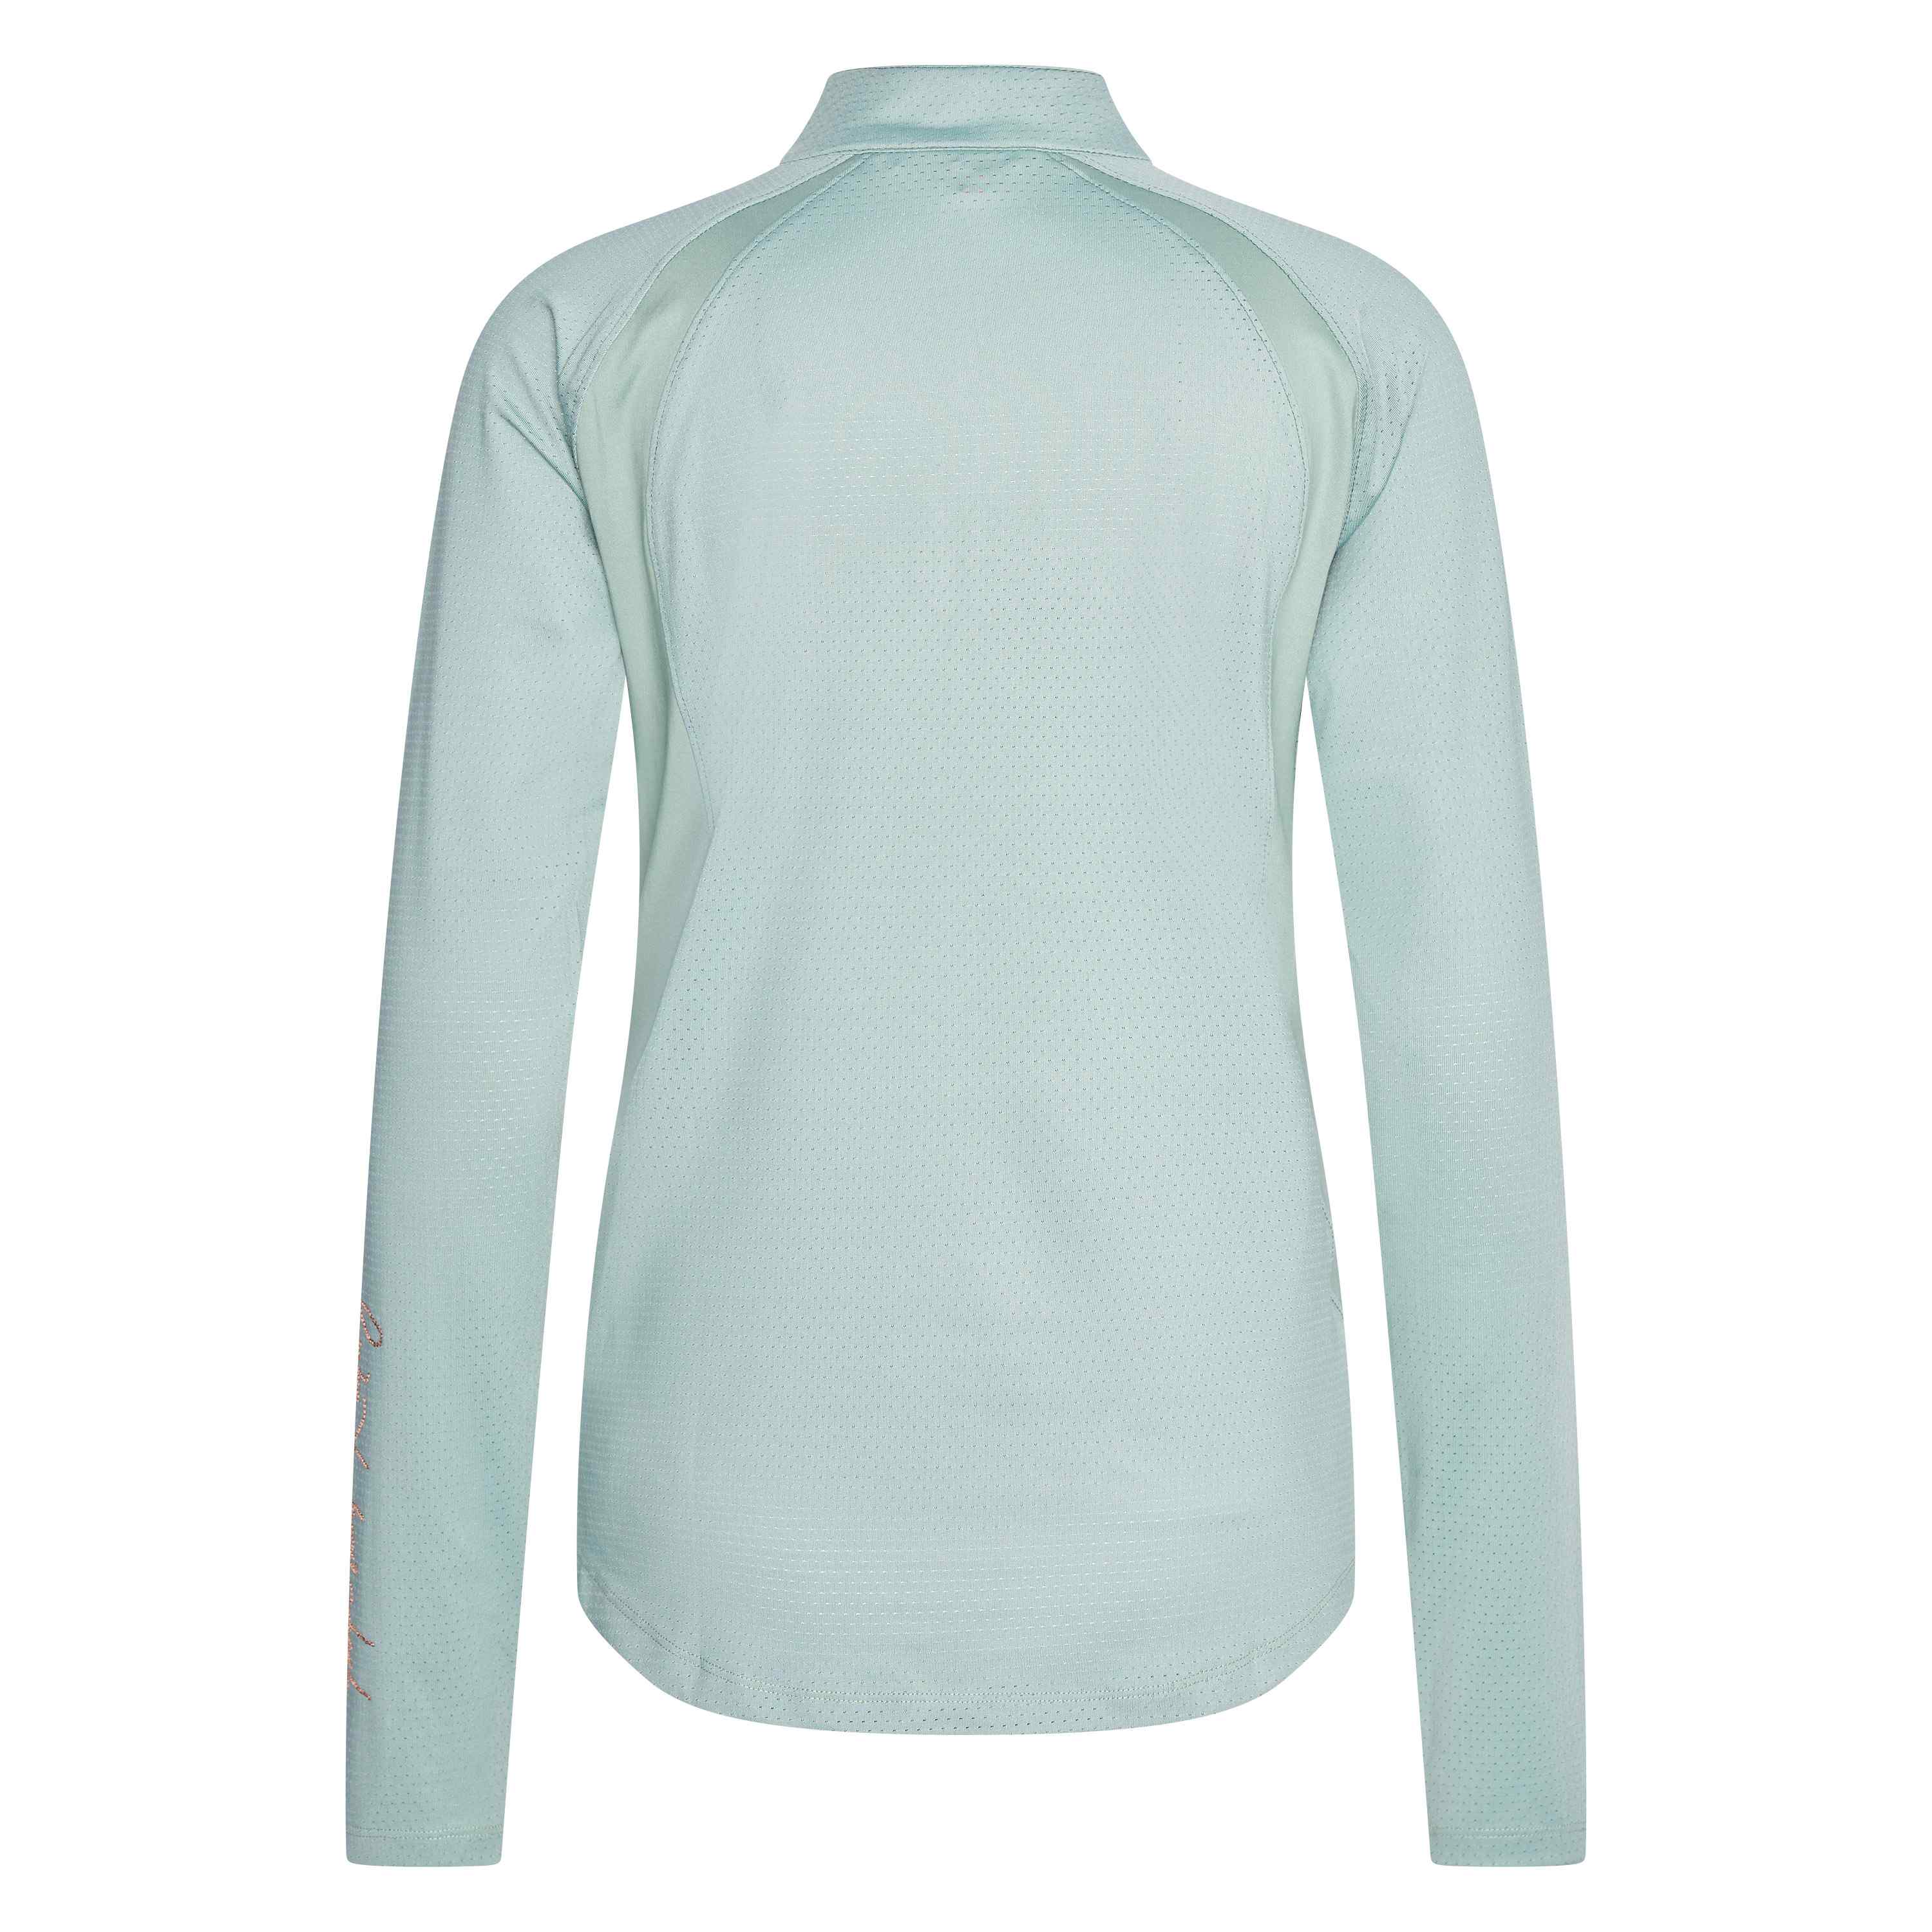 Imperial Riding | Tech Top Longsleeve Speed up Sage Green | S